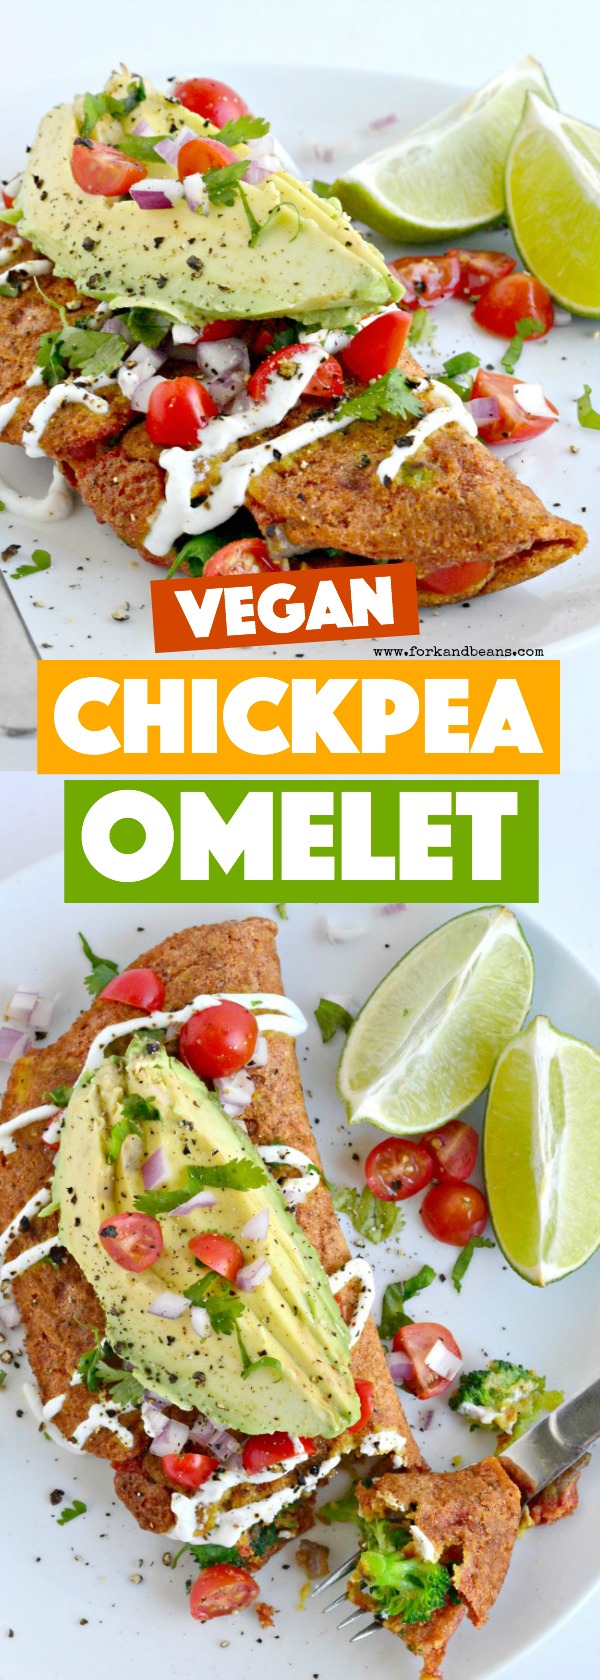 Breakfast just got EASY and tasty with this simple to make vegan Chickpea Omelet for 2. 